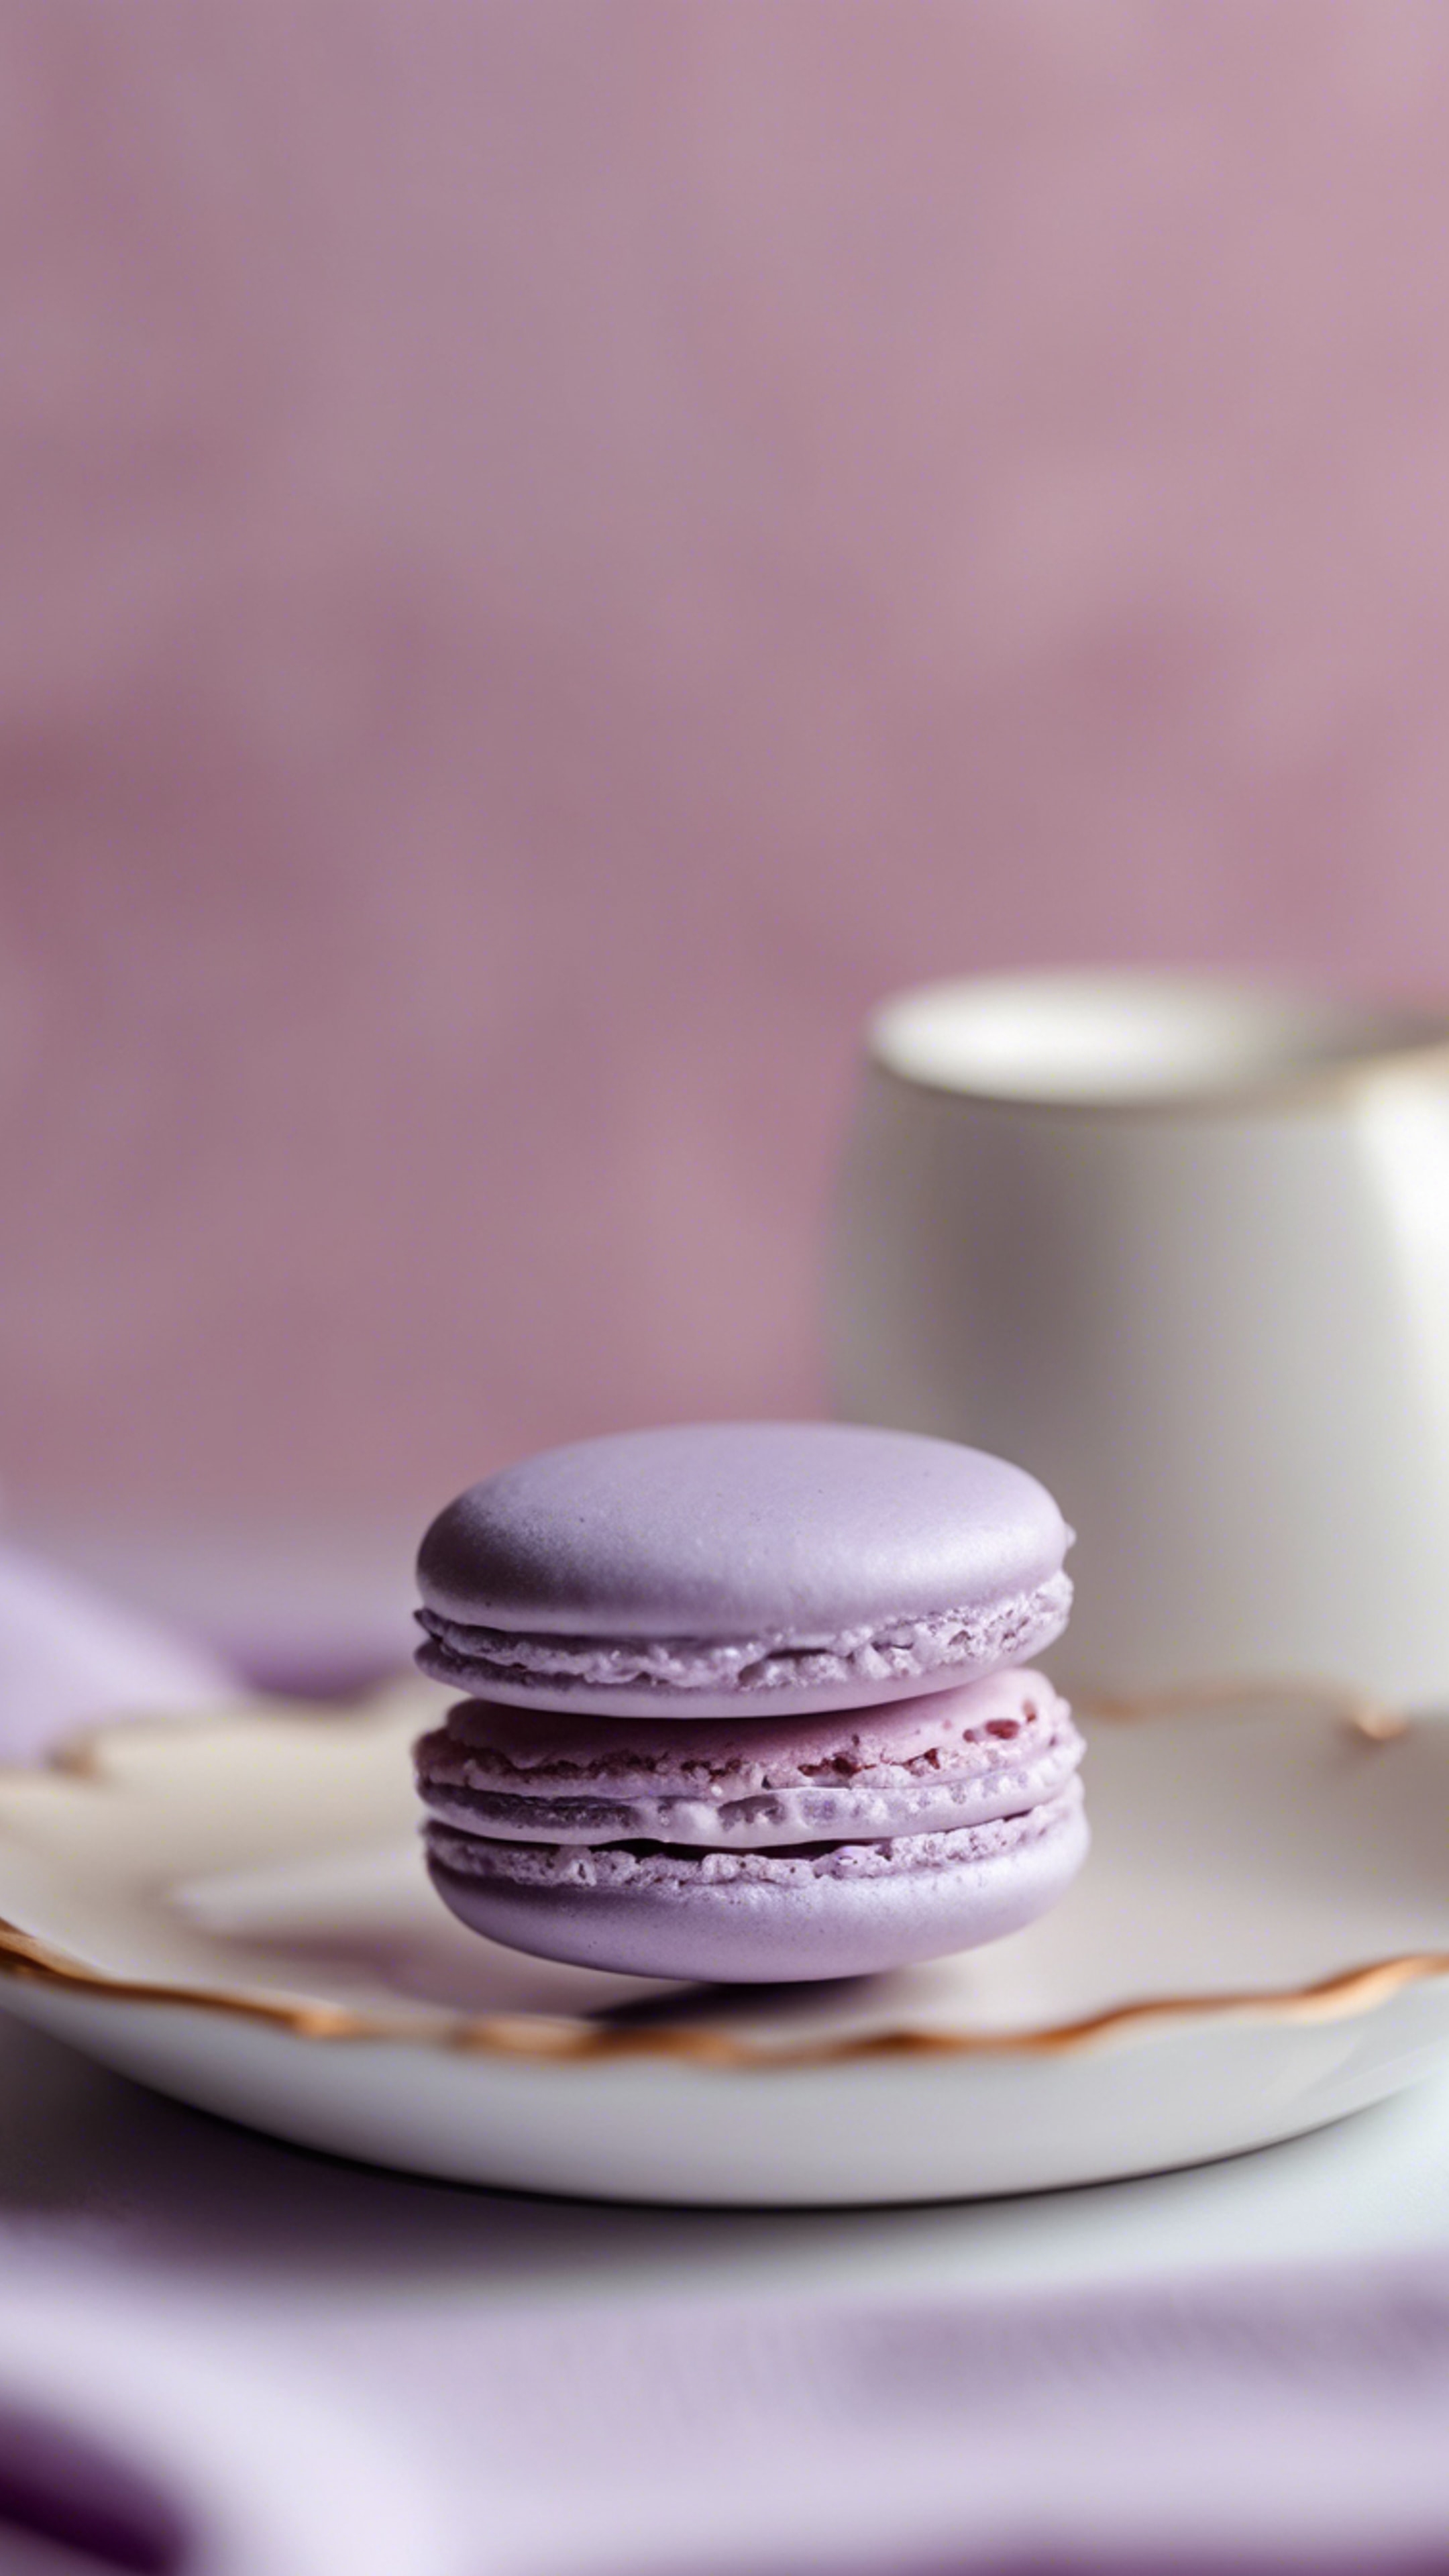 A close-up of a pastel purple-hued french macaron on a white porcelain plate. Ταπετσαρία[867427dfb4584ec3b53c]